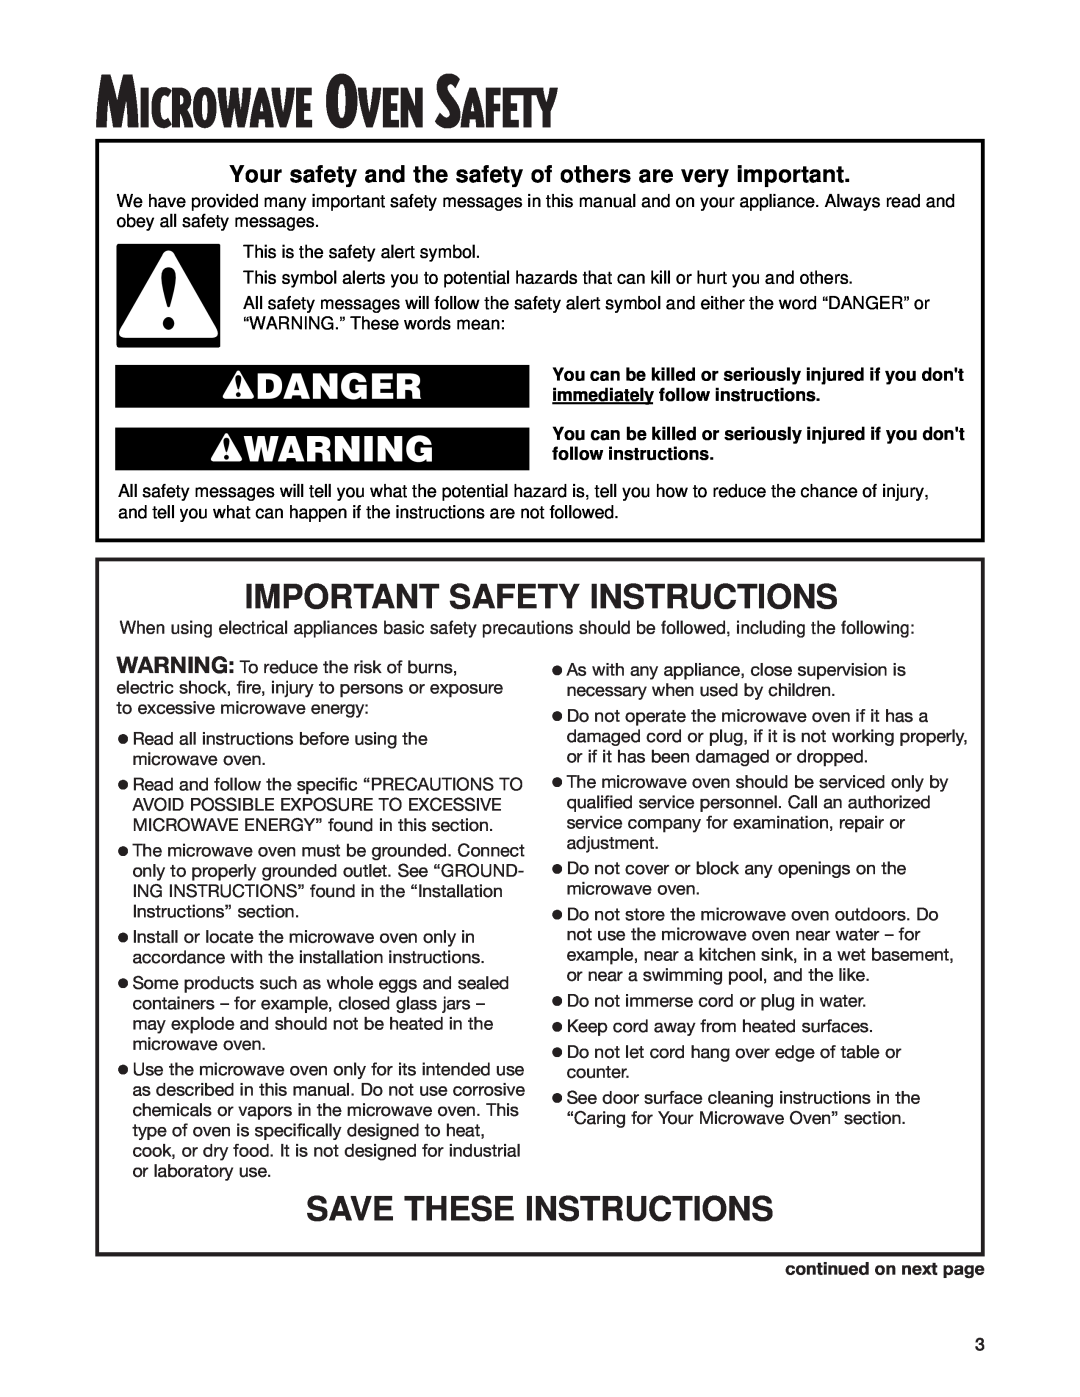 Whirlpool MT4078SK Microwave Oven Safety, wDANGER wWARNING, Important Safety Instructions, Save These Instructions 